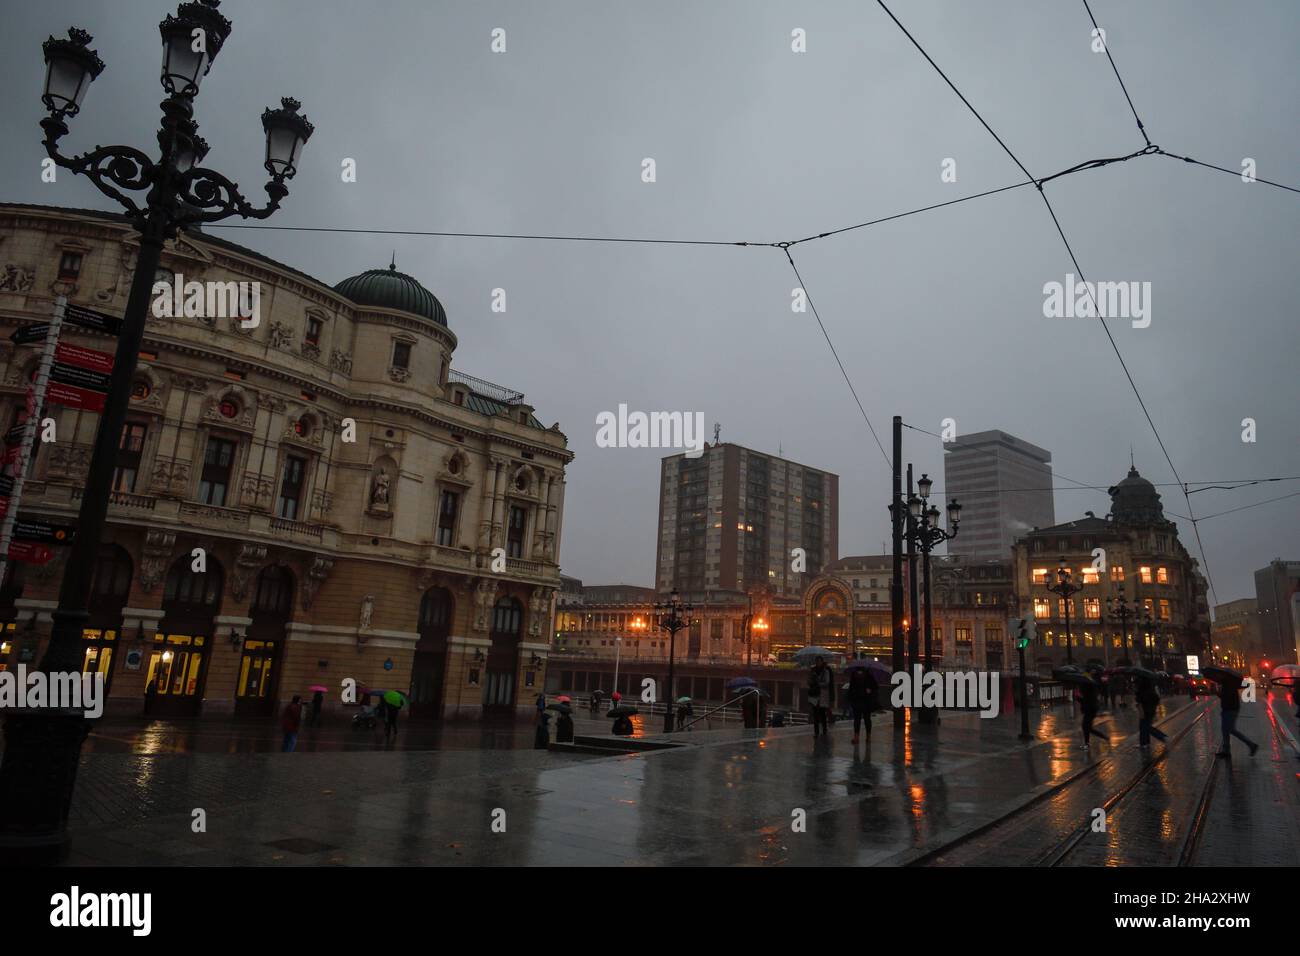 Arriaga Theater in Bilbao on a rainy evening next to the tram Stock Photo